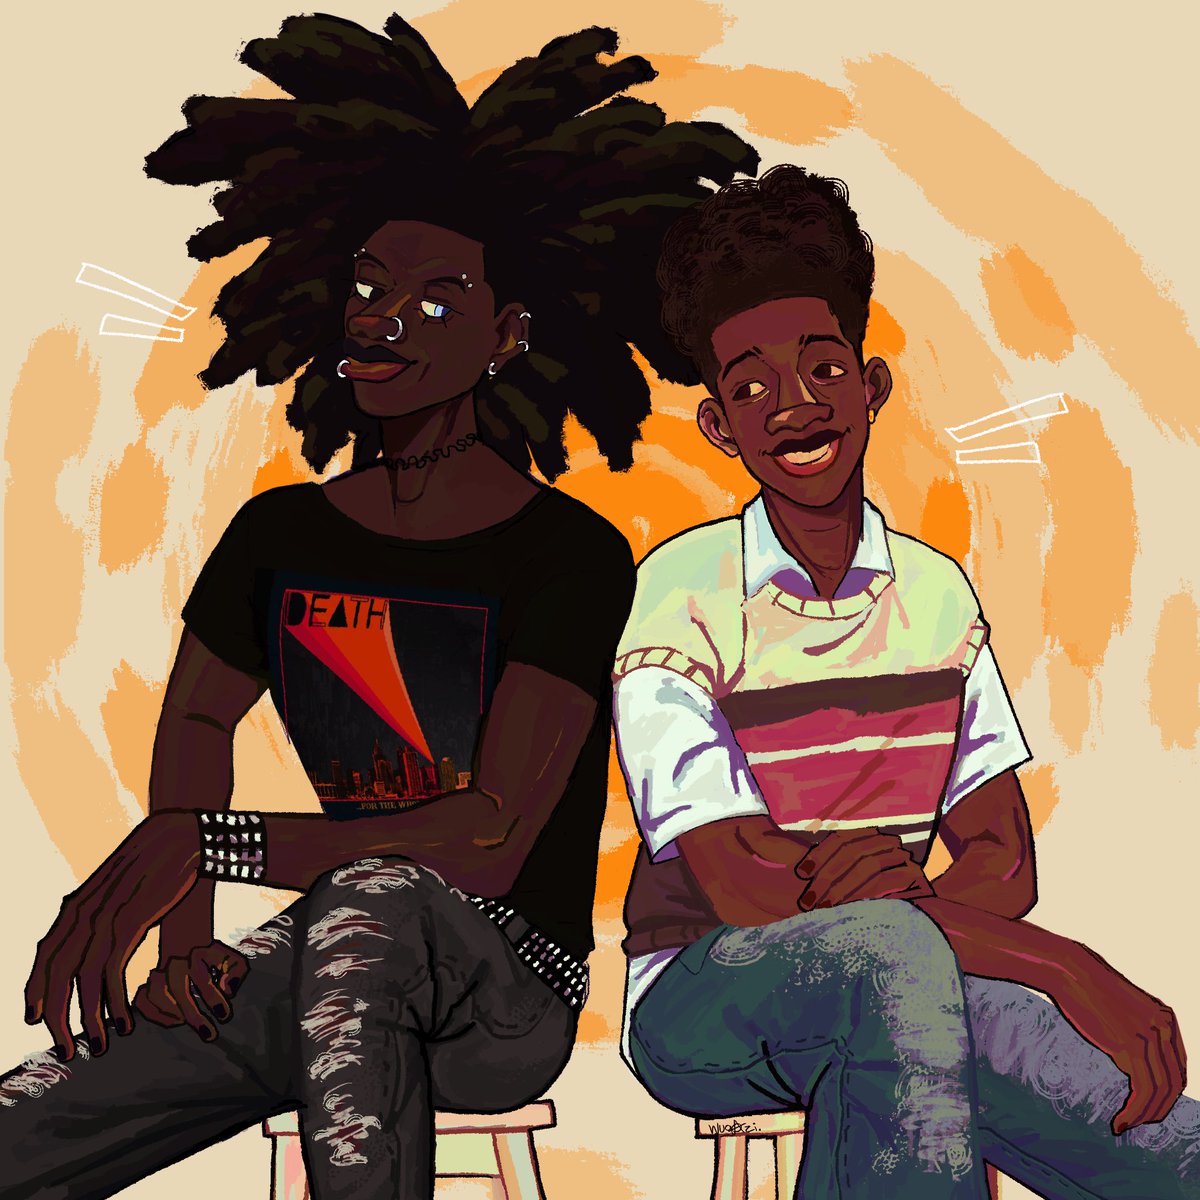 Okay here they are as promised ☀️ #HobieBrown #MilesMorales